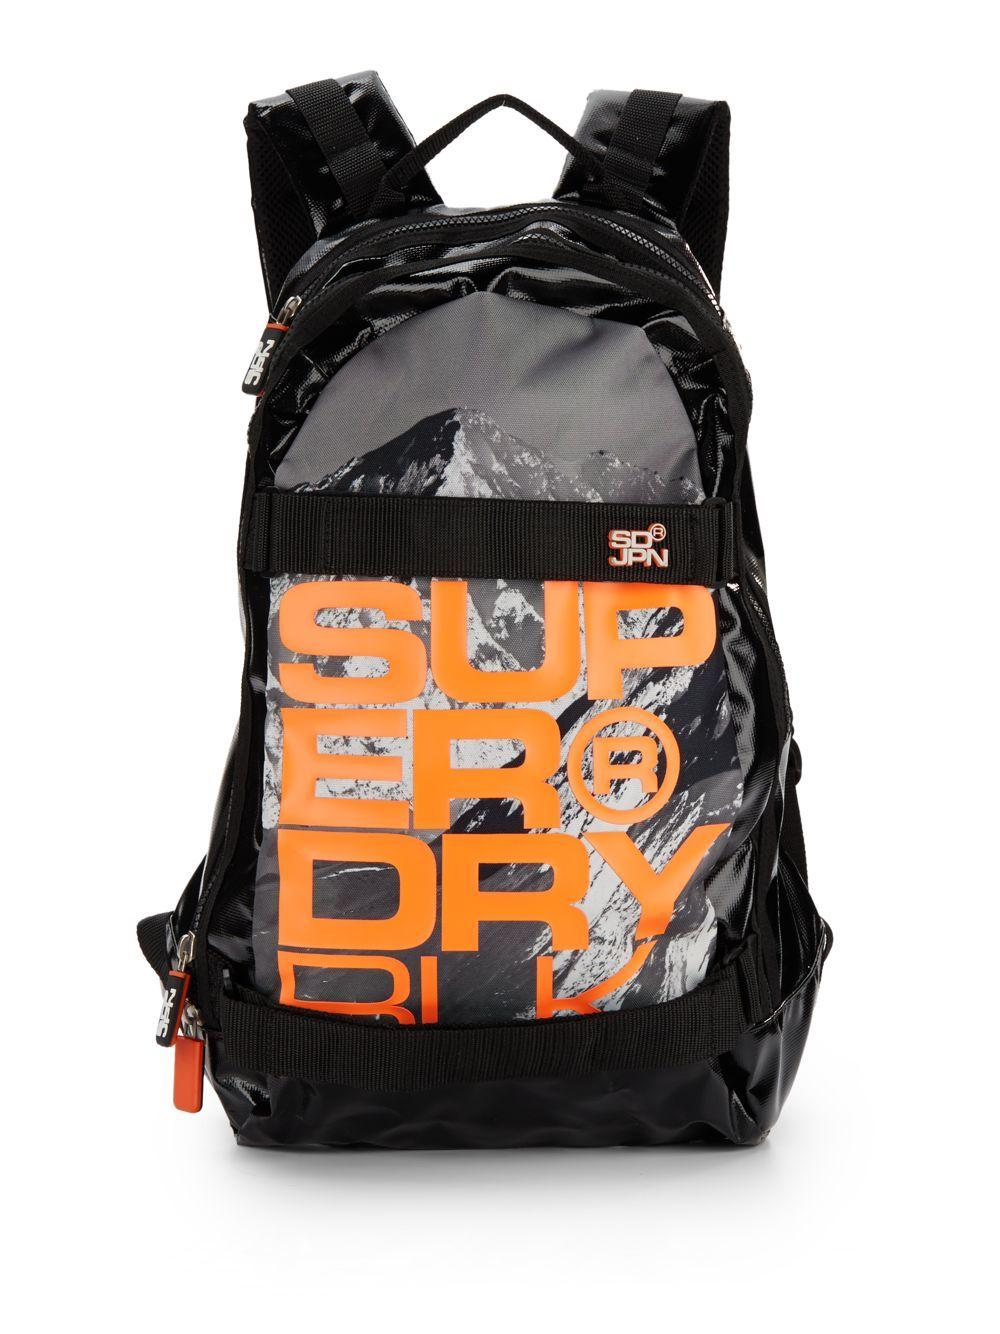 Backpack with Mountain Logo - Superdry Mountain Graphic Logo Backpack in Black for Men - Lyst